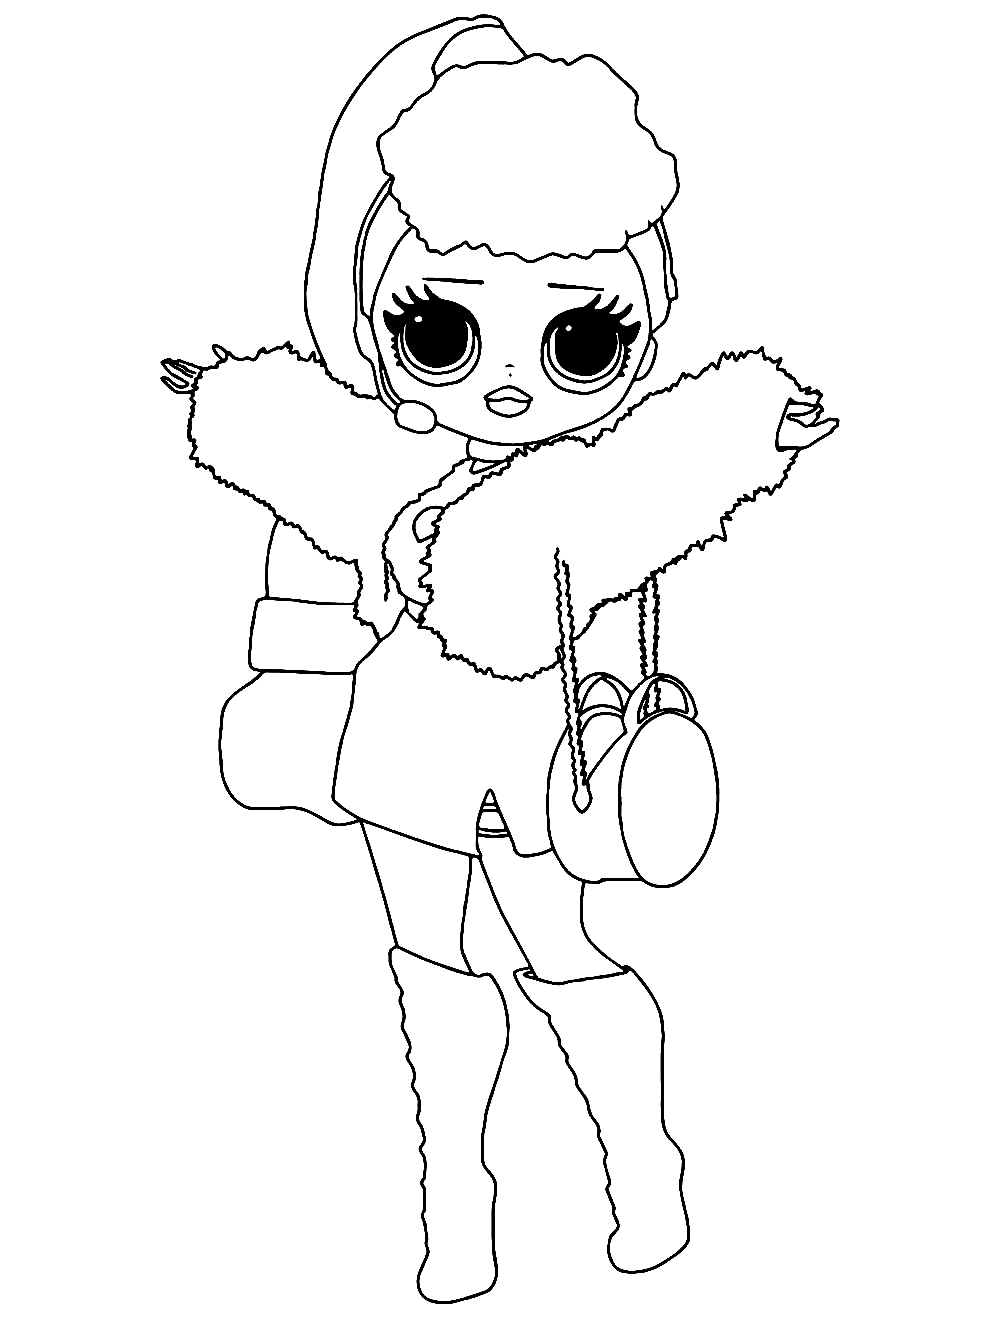 Lady Diva LOL OMG Coloring Page